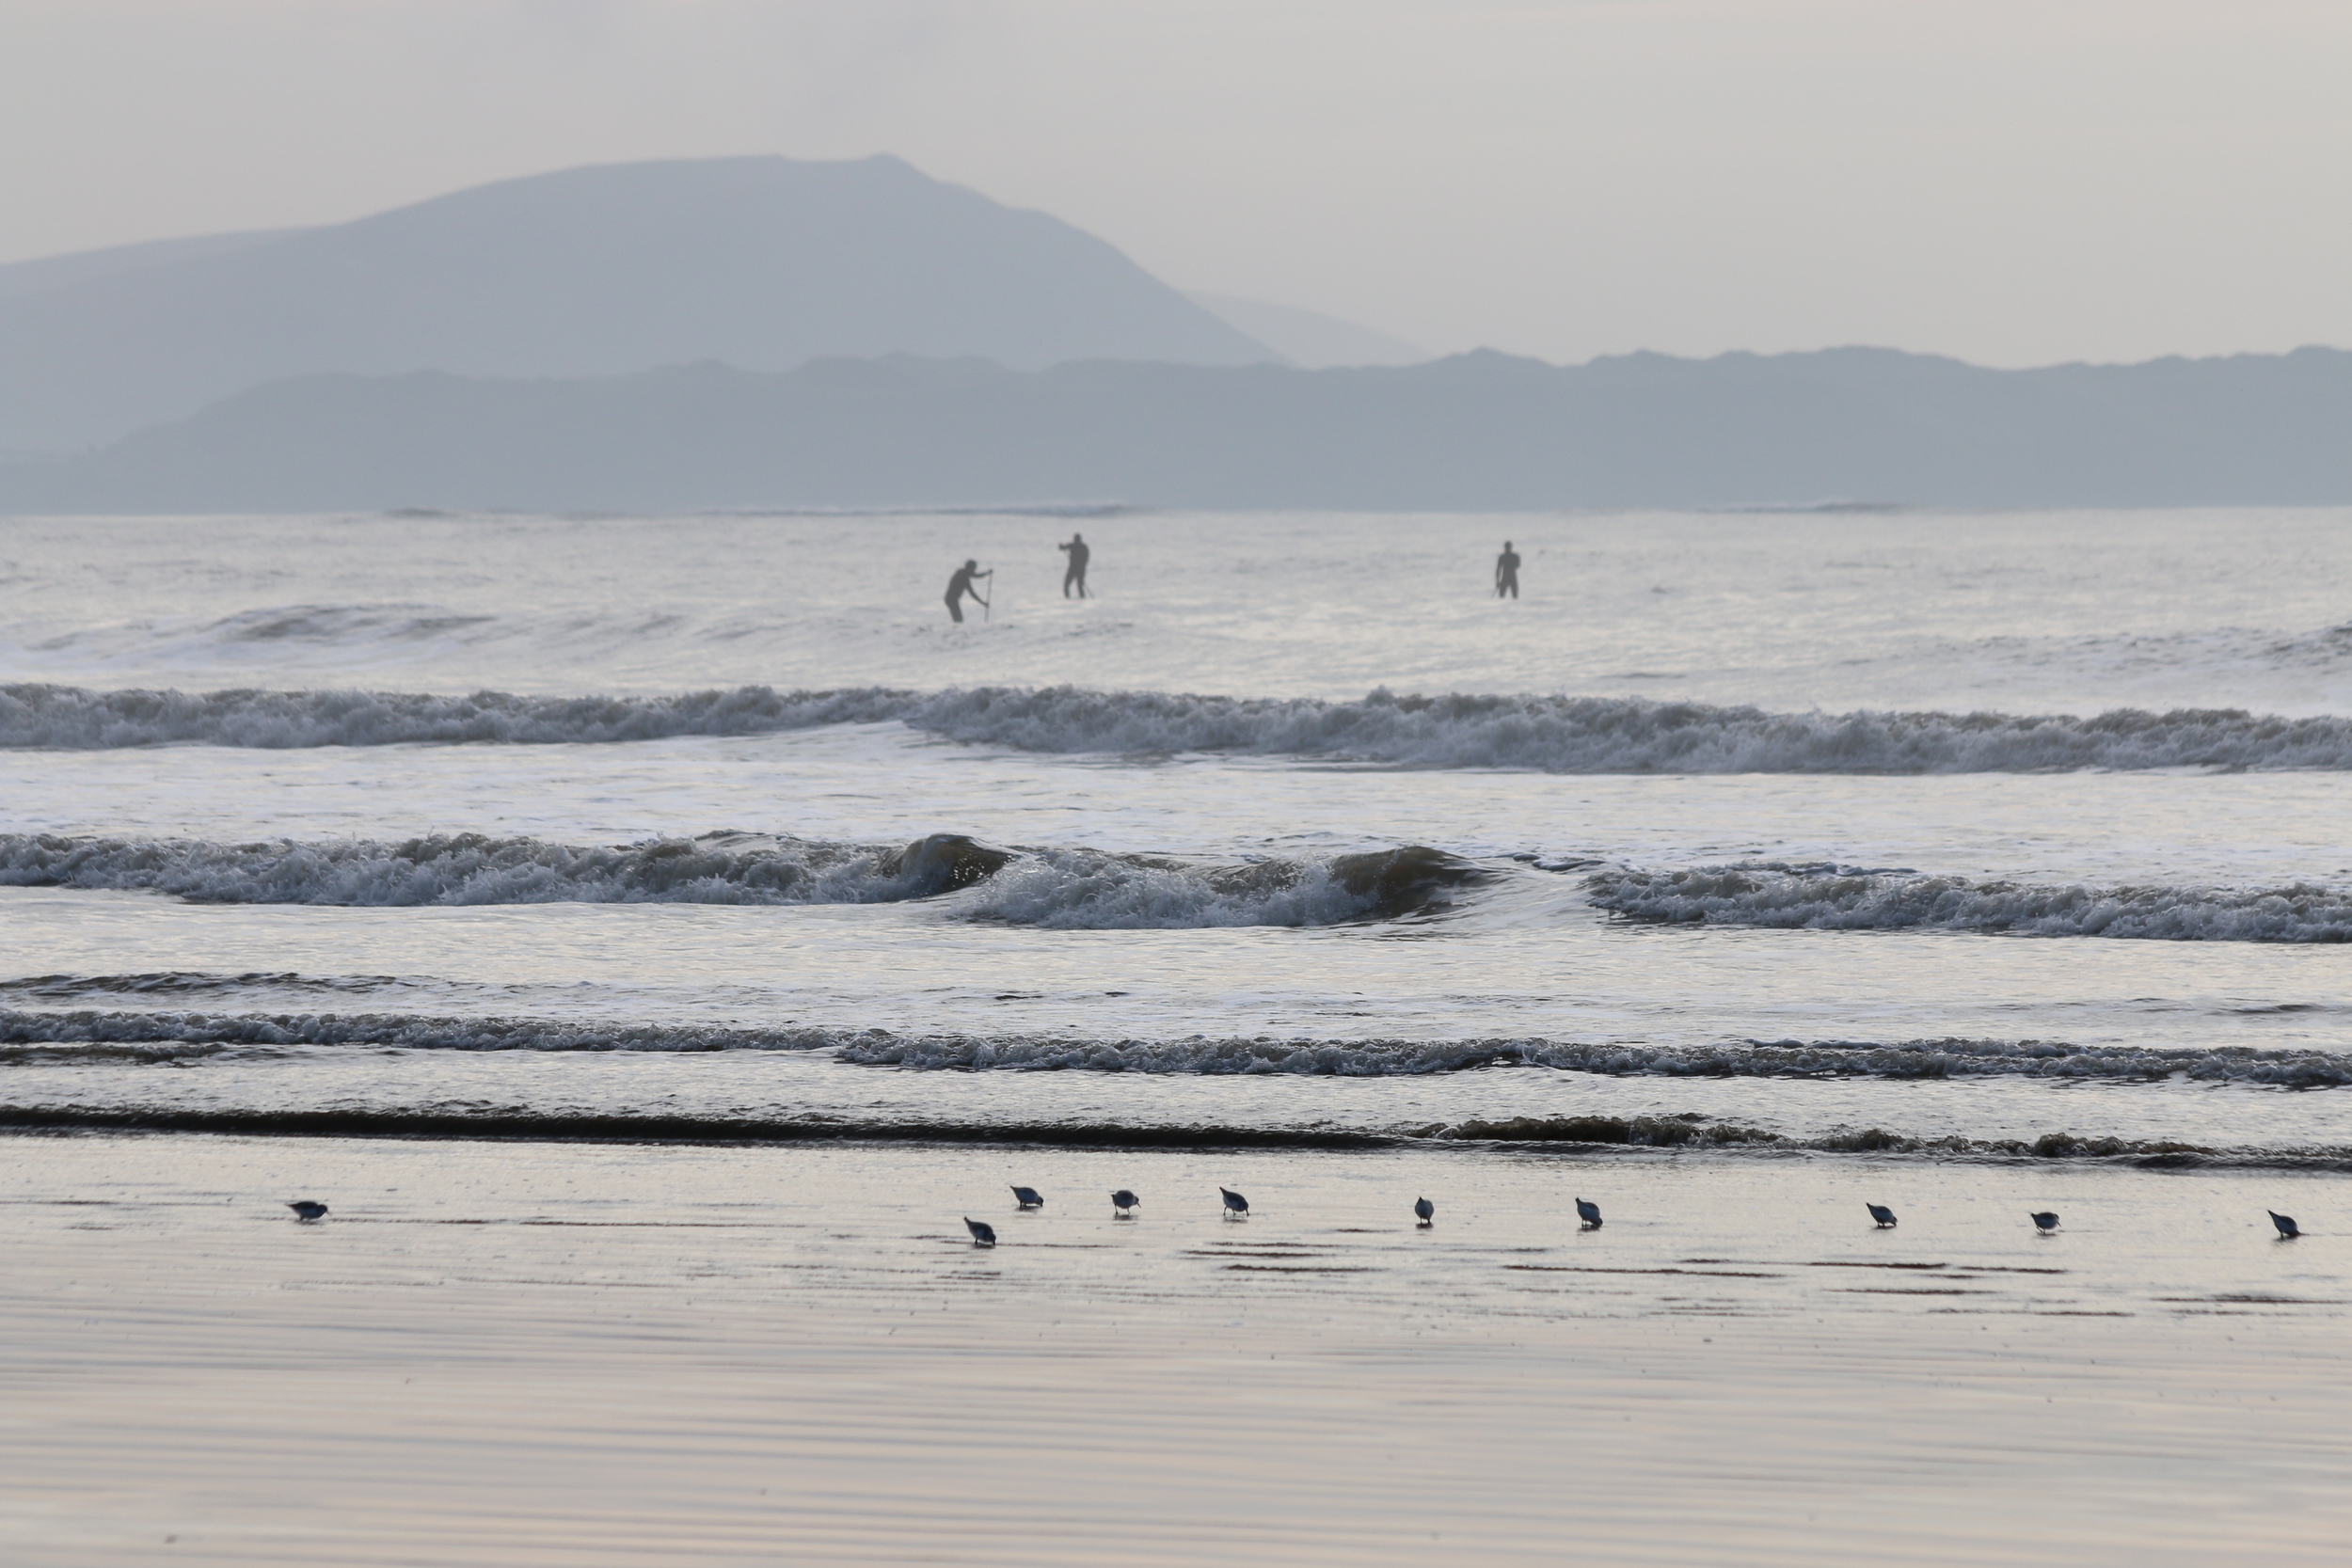 Stand-up-paddleboarders and sandpipers: Cefn Sidan.